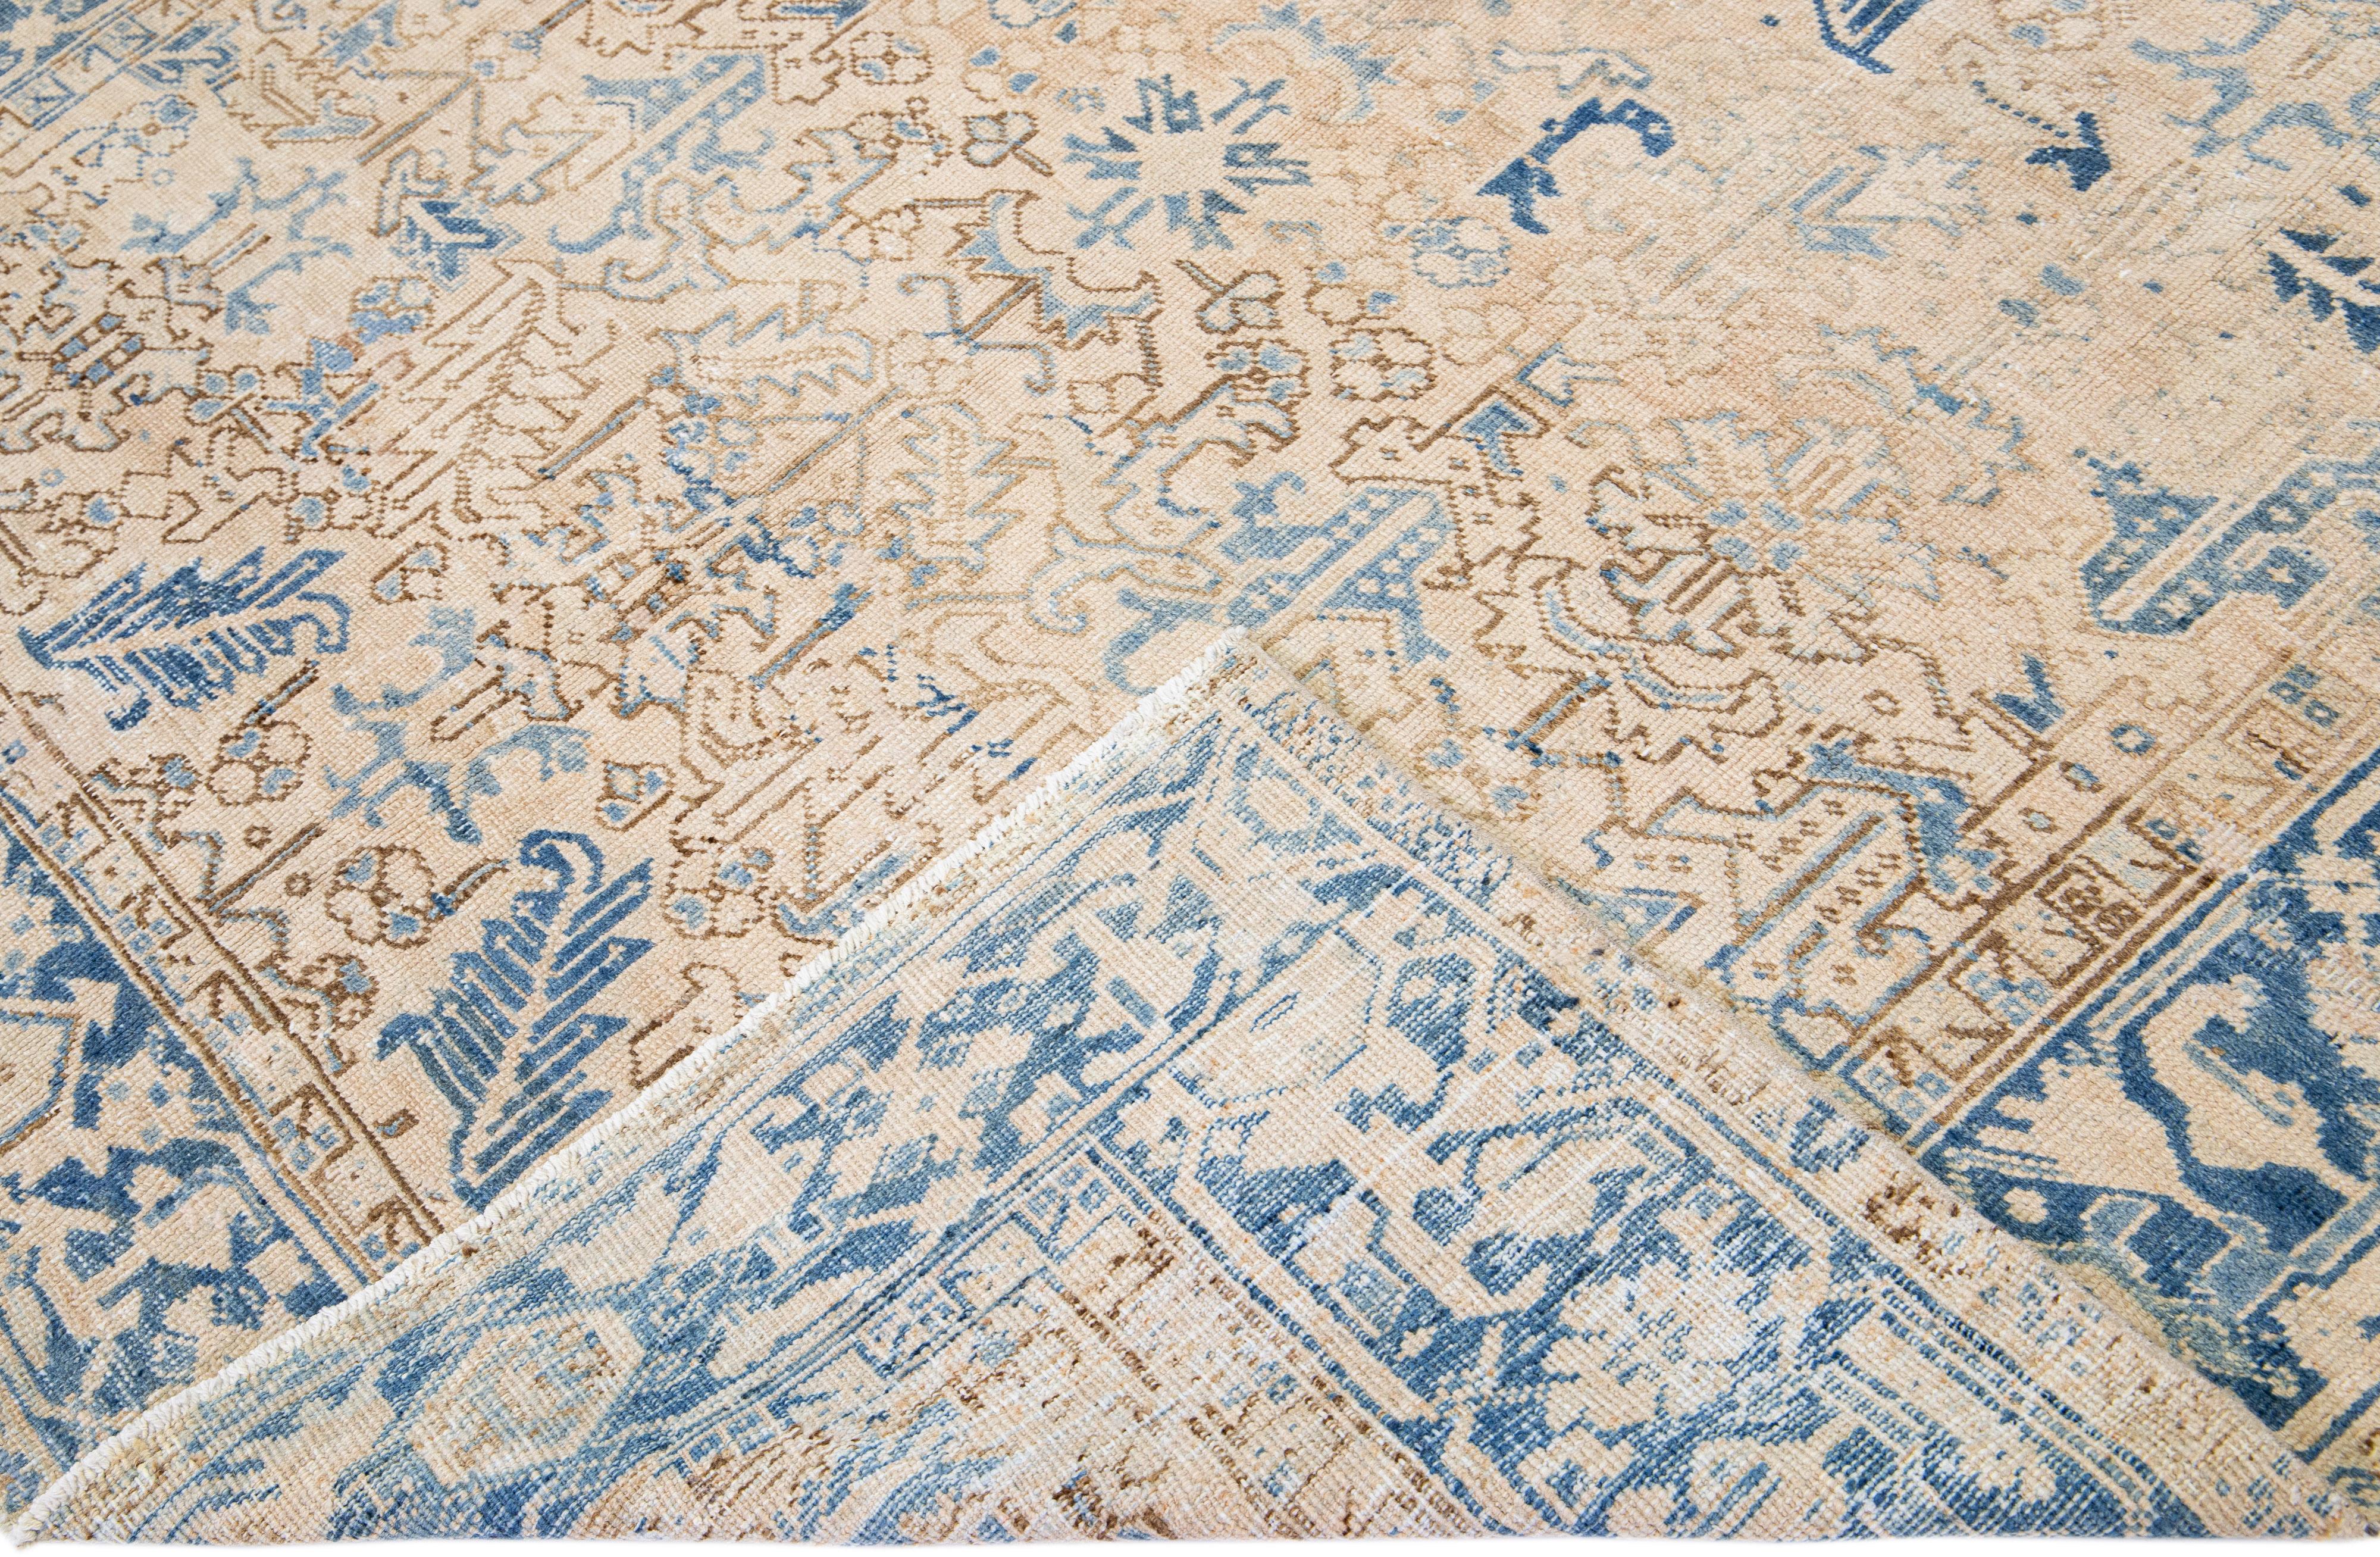 Beautiful antique Heriz hand-knotted wool rug with a beige field. This Persian rug has a blue frame and accents in a gorgeous all-over layout geometric Shabby chic motif.

This rug measures: 7'2